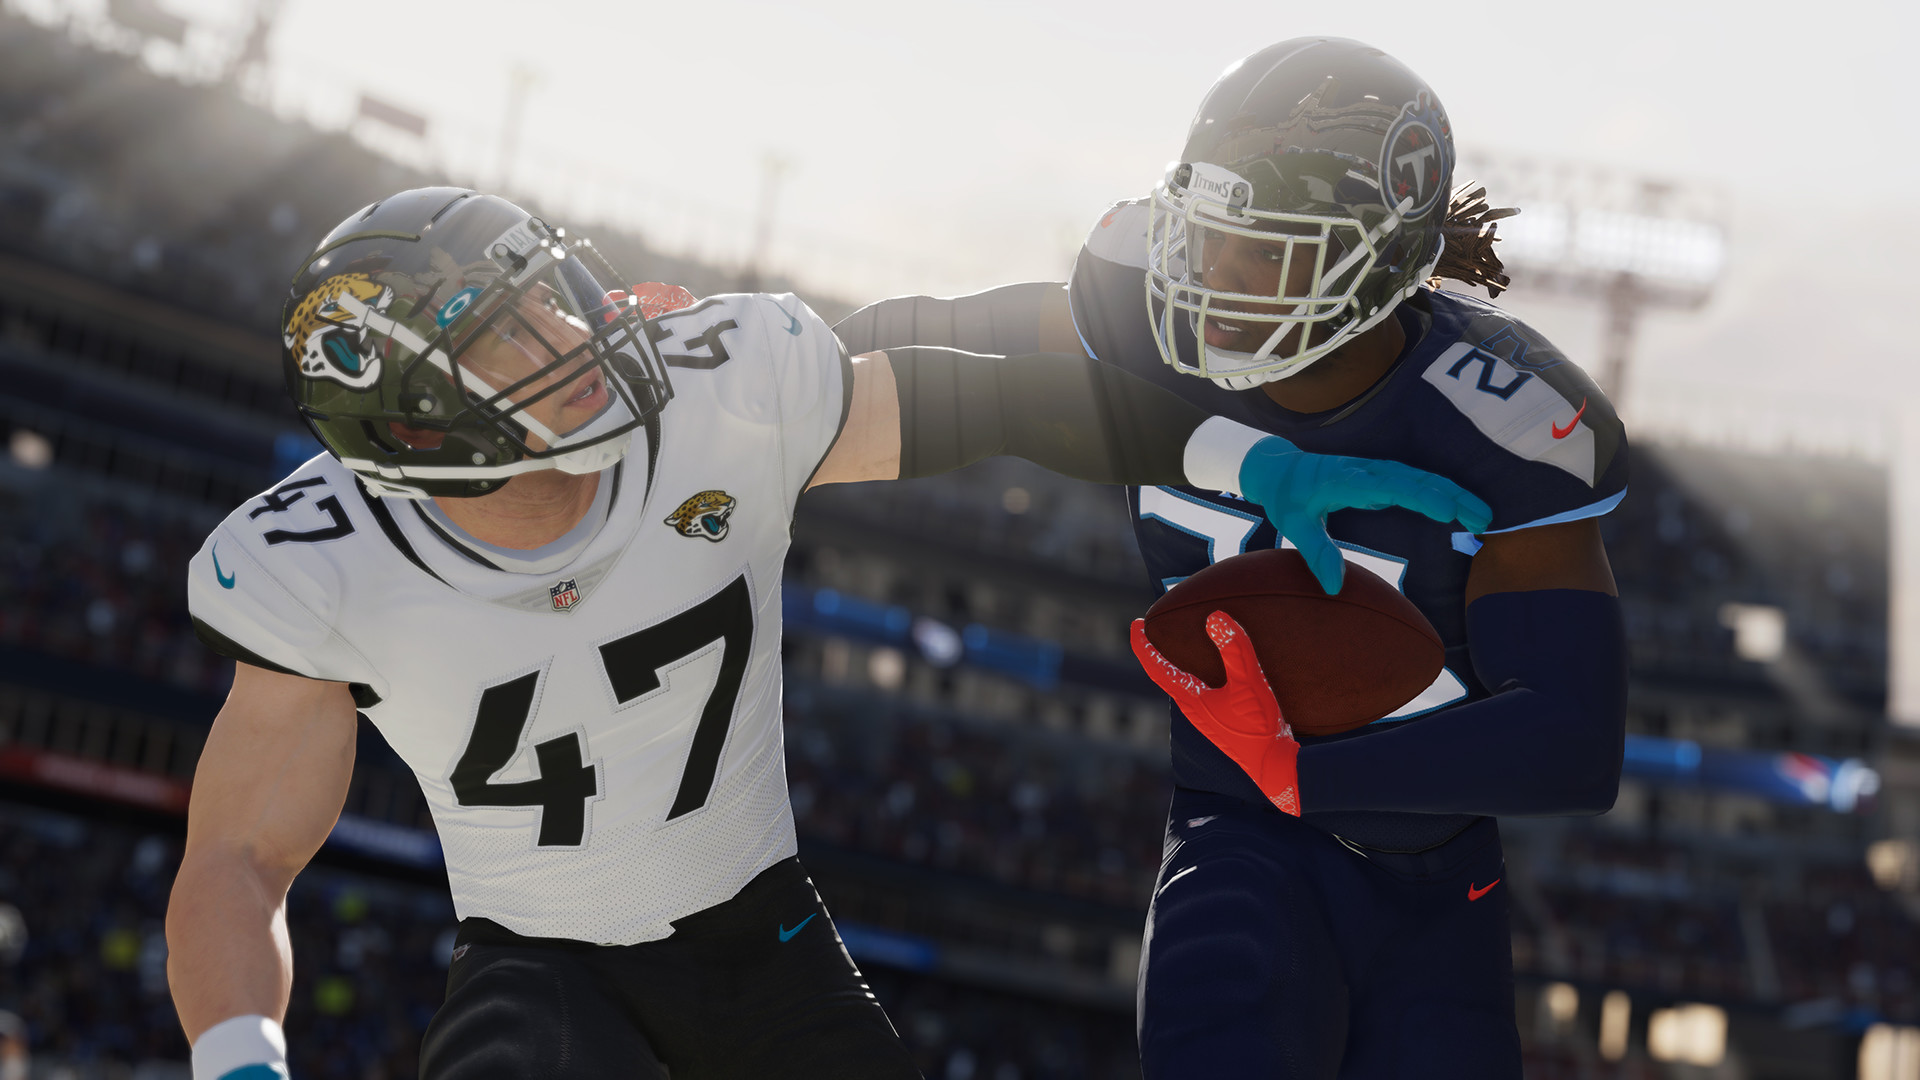 Madden NFL 22 PlayStation 4 Account Pixelpuffin.net Activation Link